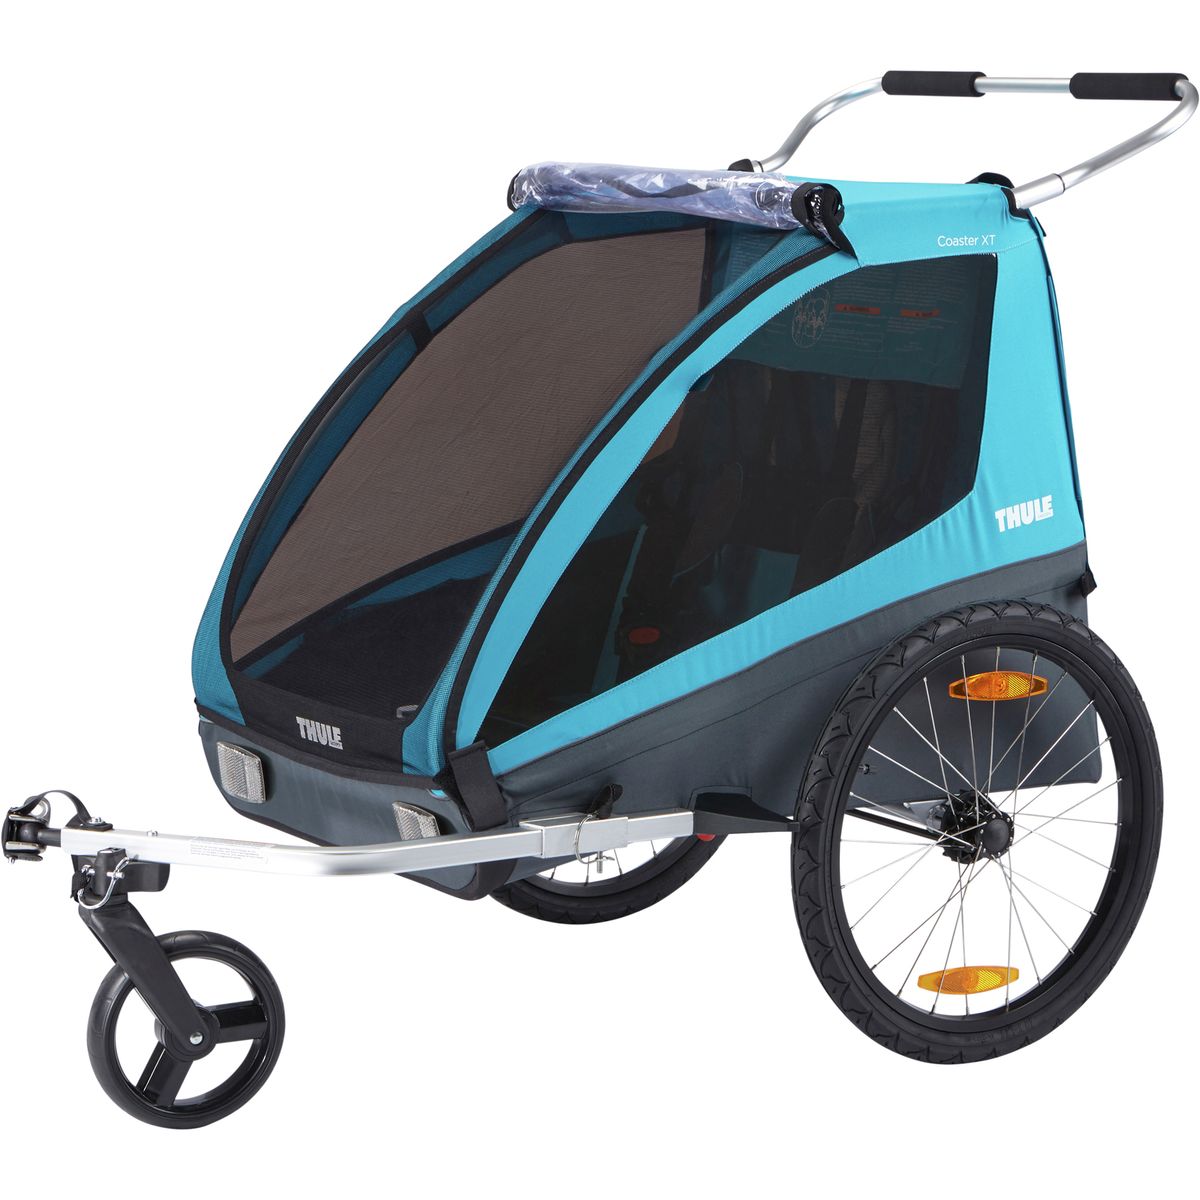 Thule Chariot Coaster XT with Bicycle Trailer Kit & Stroller Kit